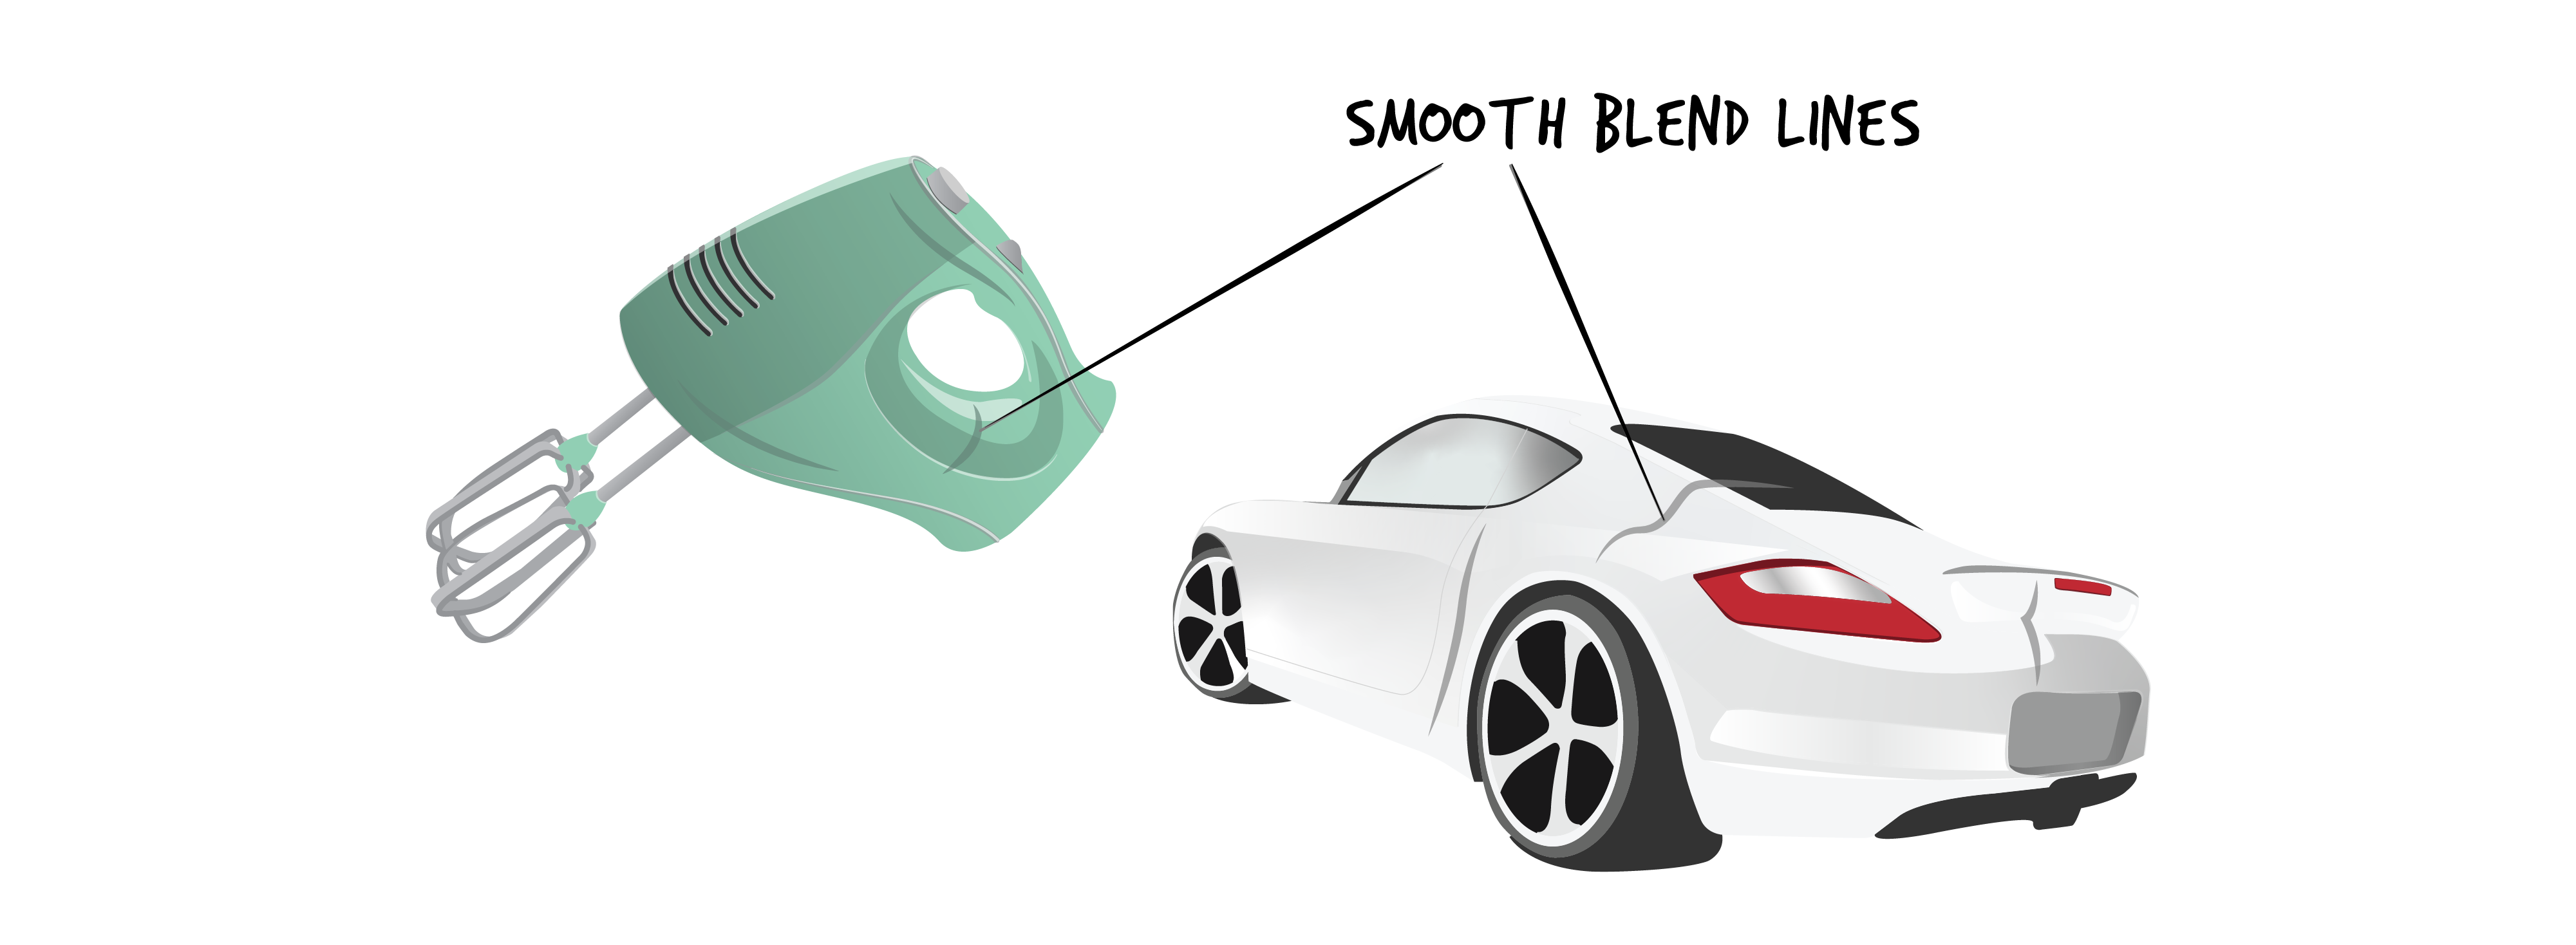 On the left is a green electric handmixer with sharp blend lines. On the right is a white and black car with complex surfaces, many differentiated by sharp blend lines similar to those on the blender.